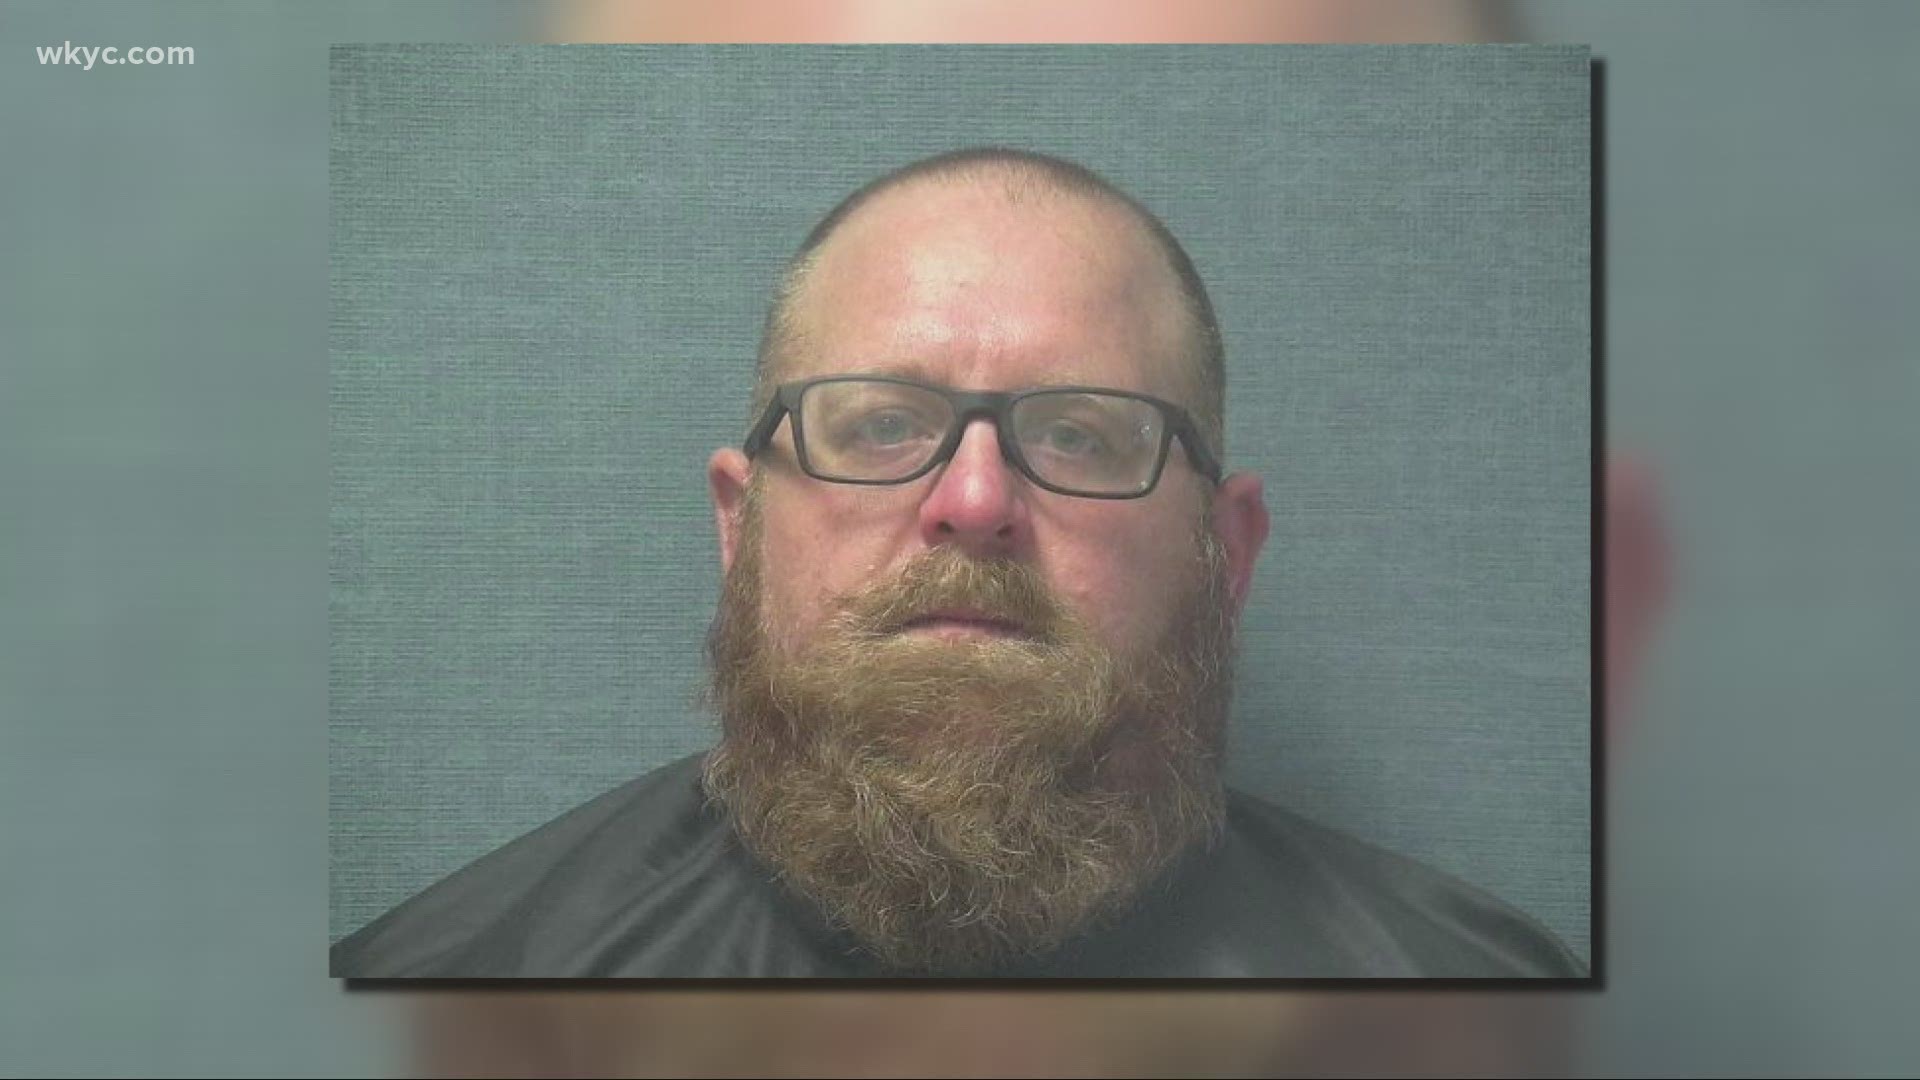 39-year-old Jason Neading was arrested on Friday. Neading is a former eighth grade teacher at Sandy Valley Middle School in Canton.